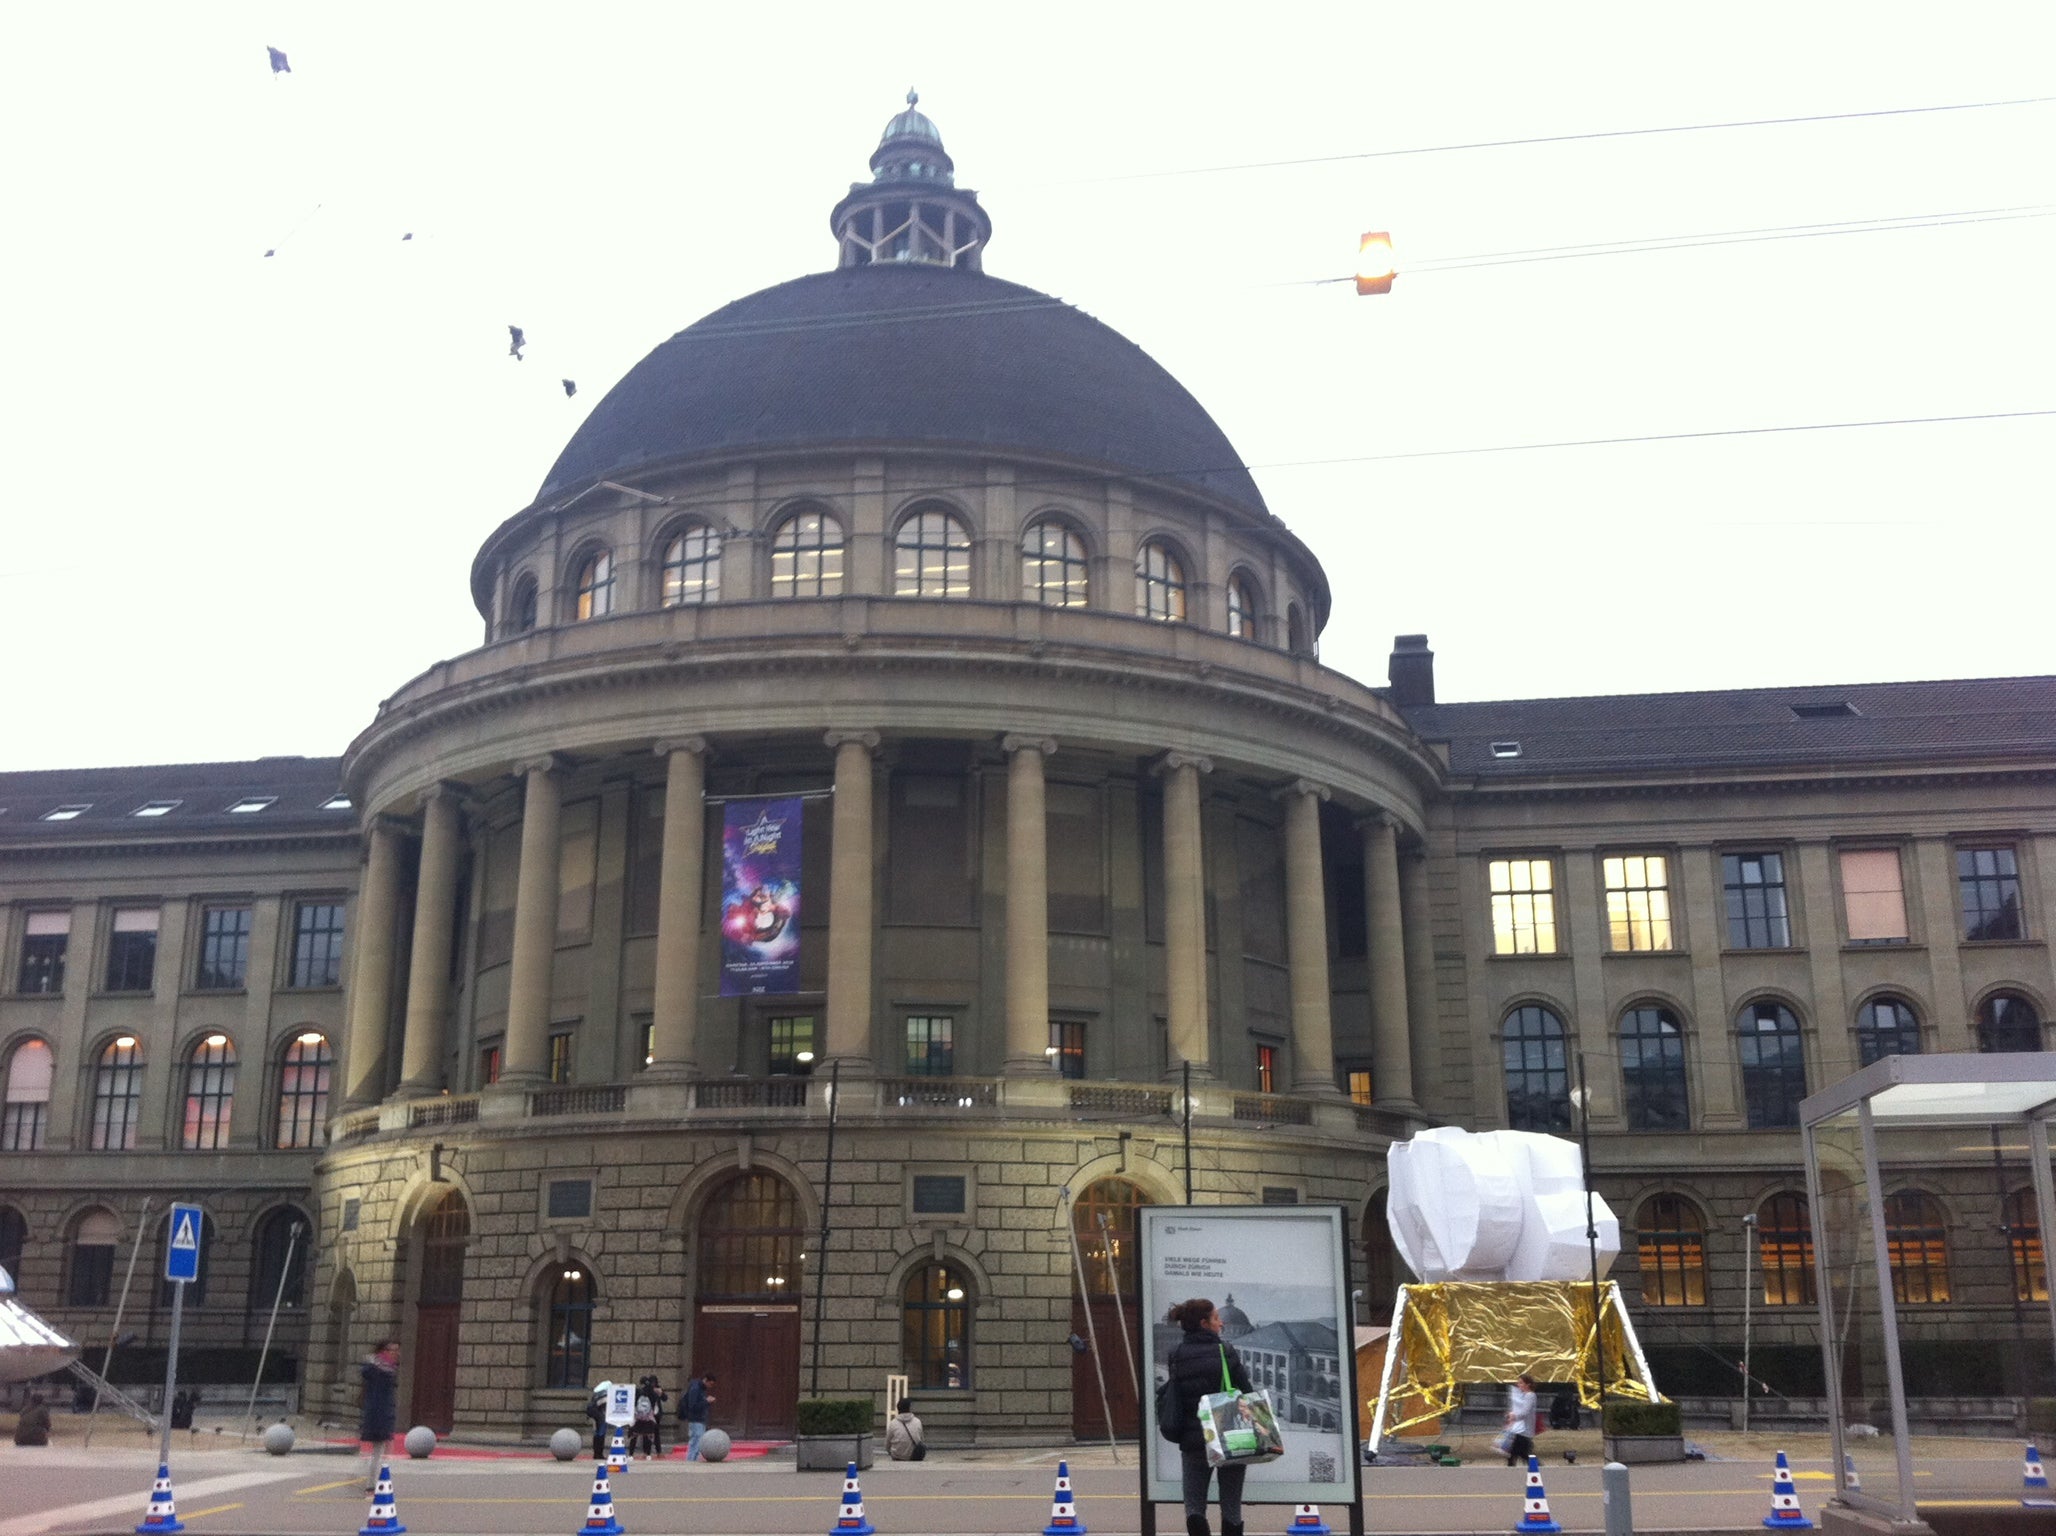 the main building at ETH in the afternoon before the annual traditional Polyball event